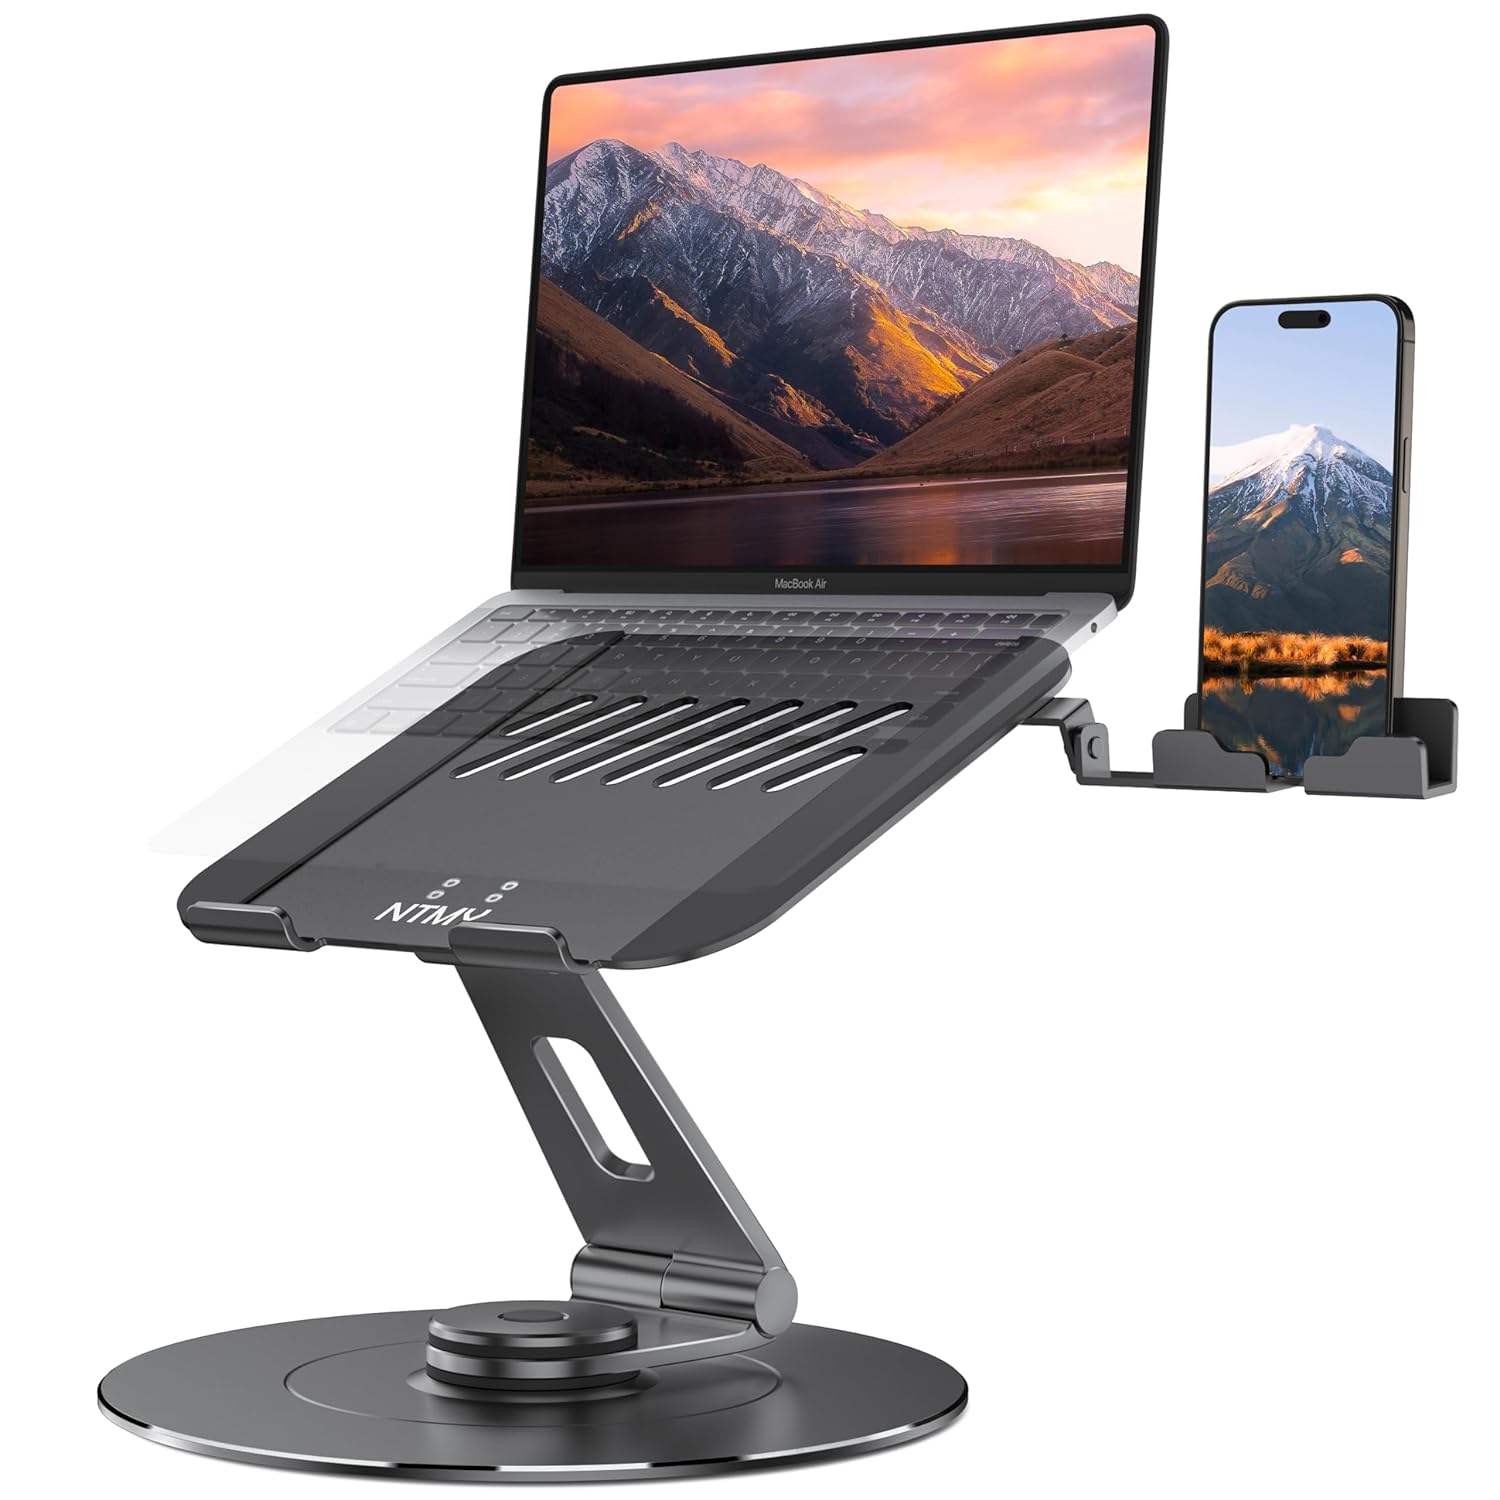 NTMY 360 Rotating Laptop Stand for Desk with Phone Holder, Aluminum Sturdy Adjustable Foldable Computer Stand Fits All MacBook Laptops Tablets 10-17" (Space Grey)